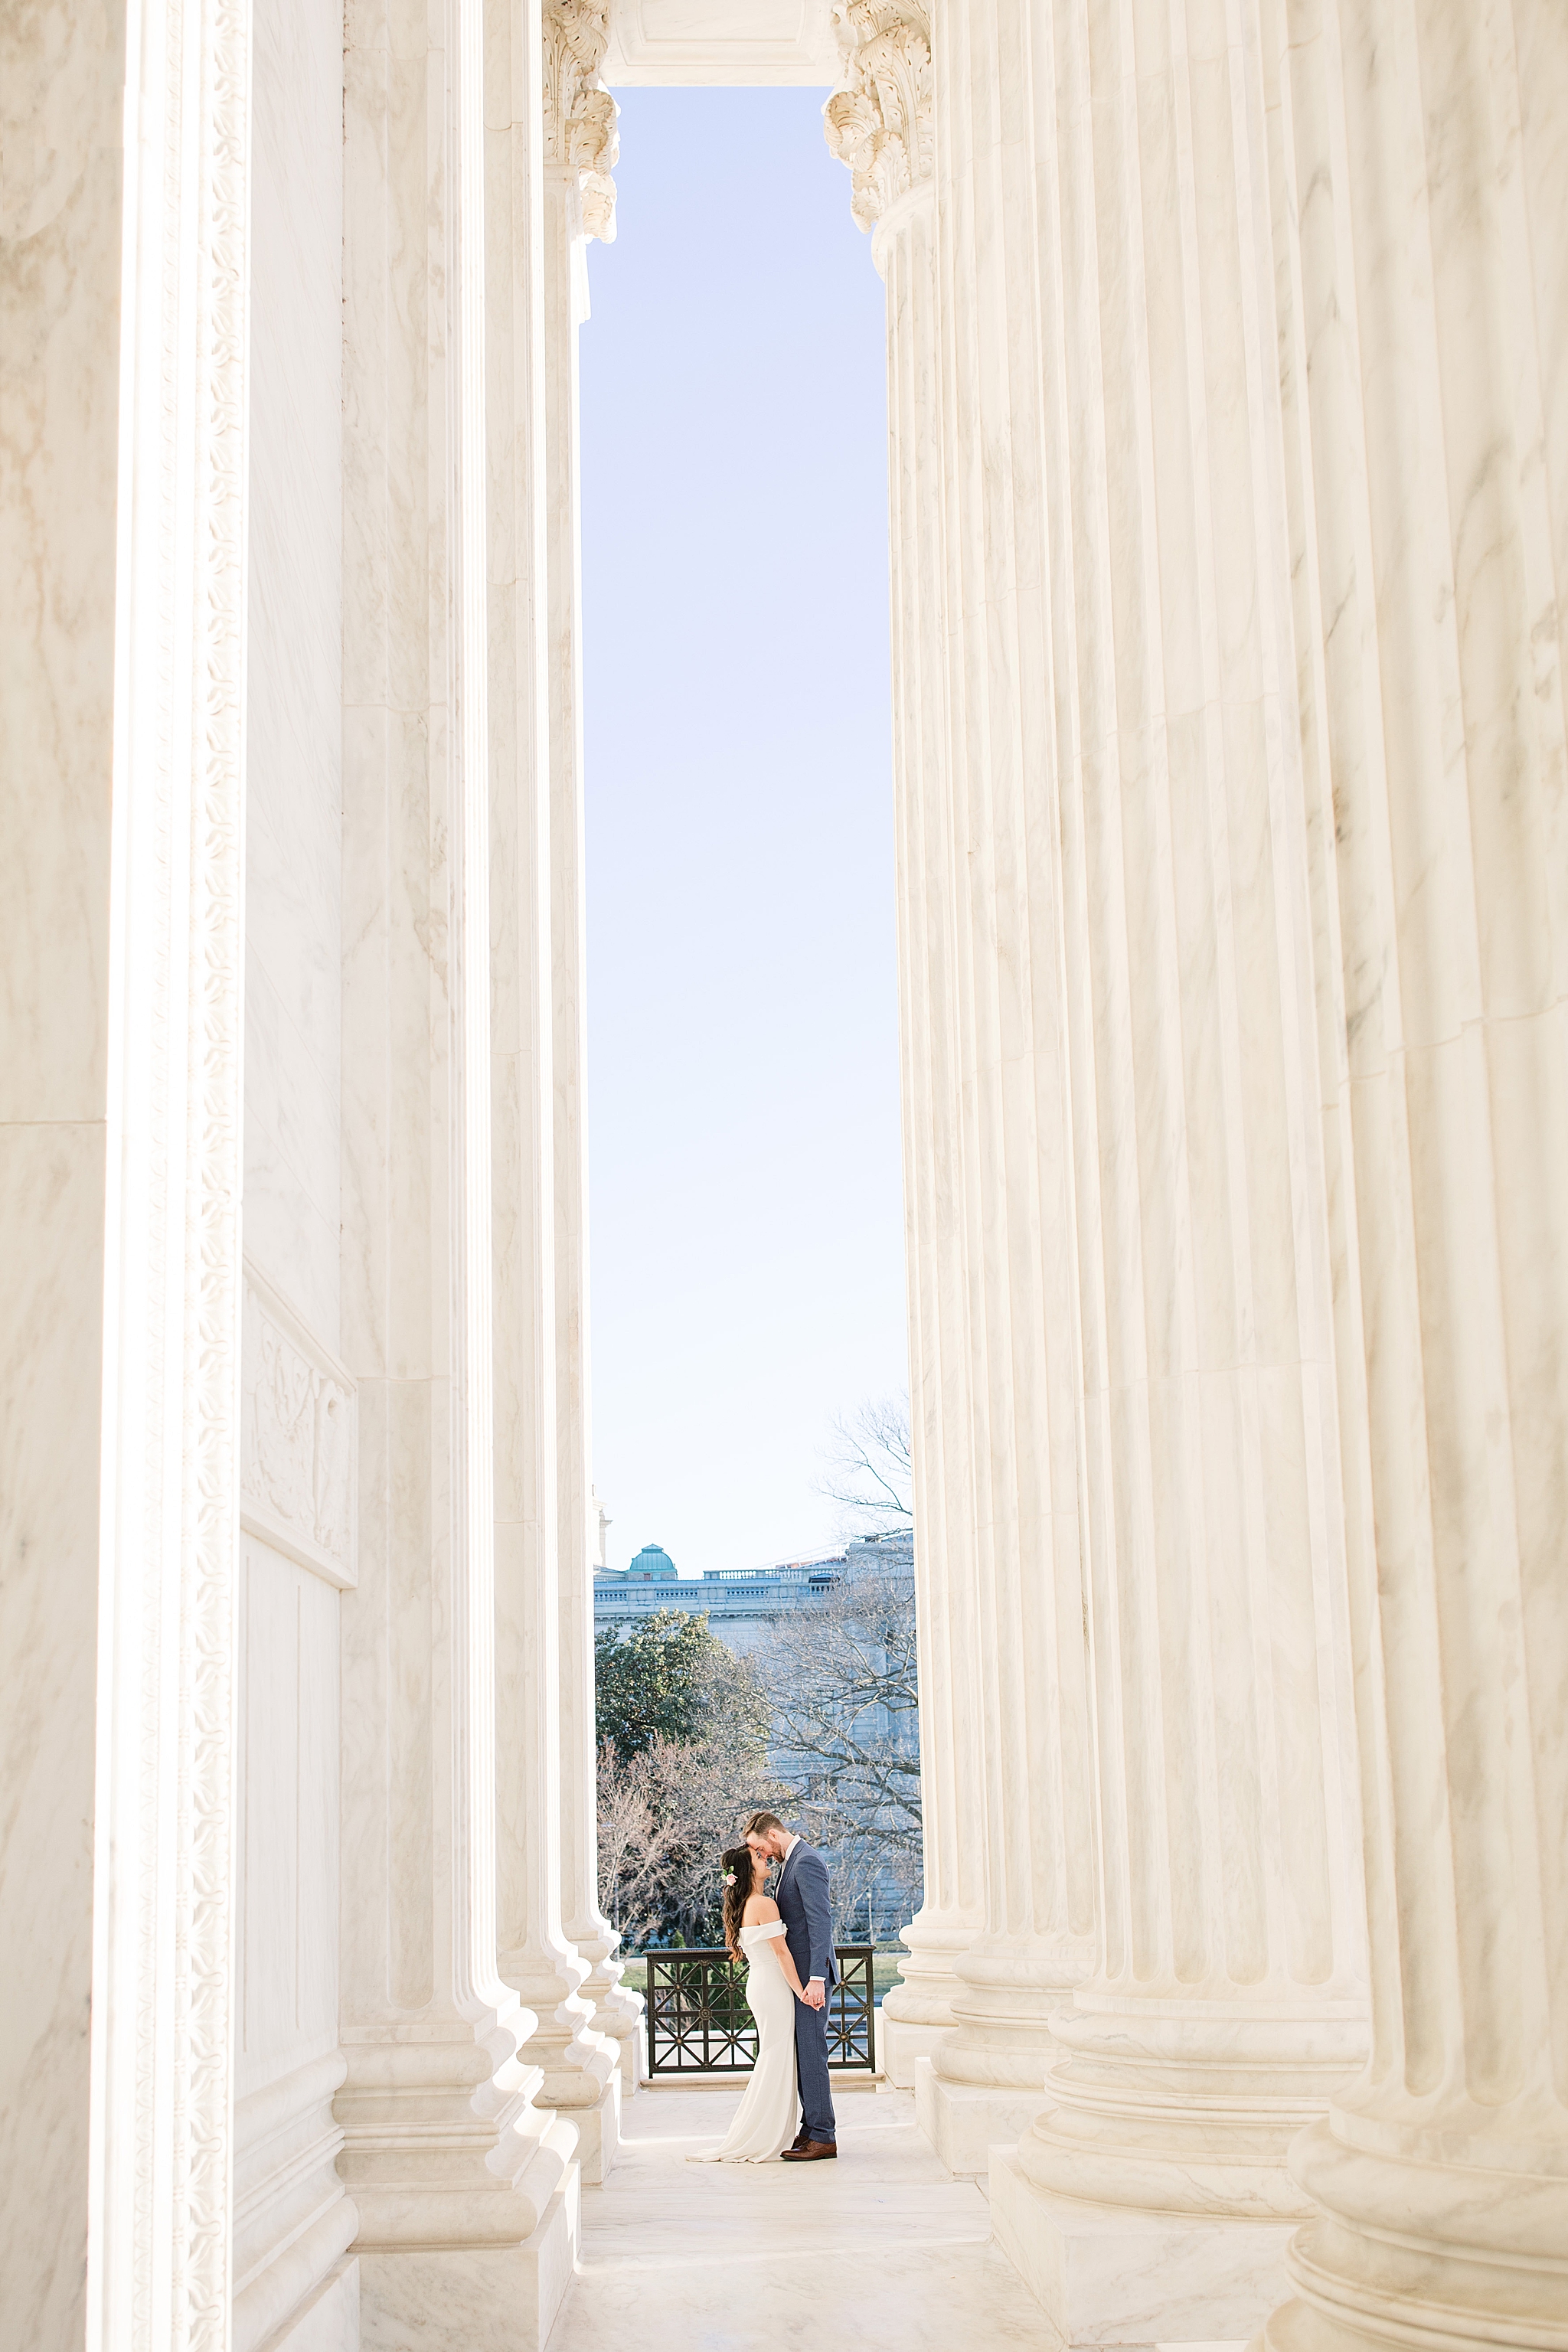 A romantic wedding elopement in Washington, DC; photographed by fine art film photographer, Alicia Lacey.